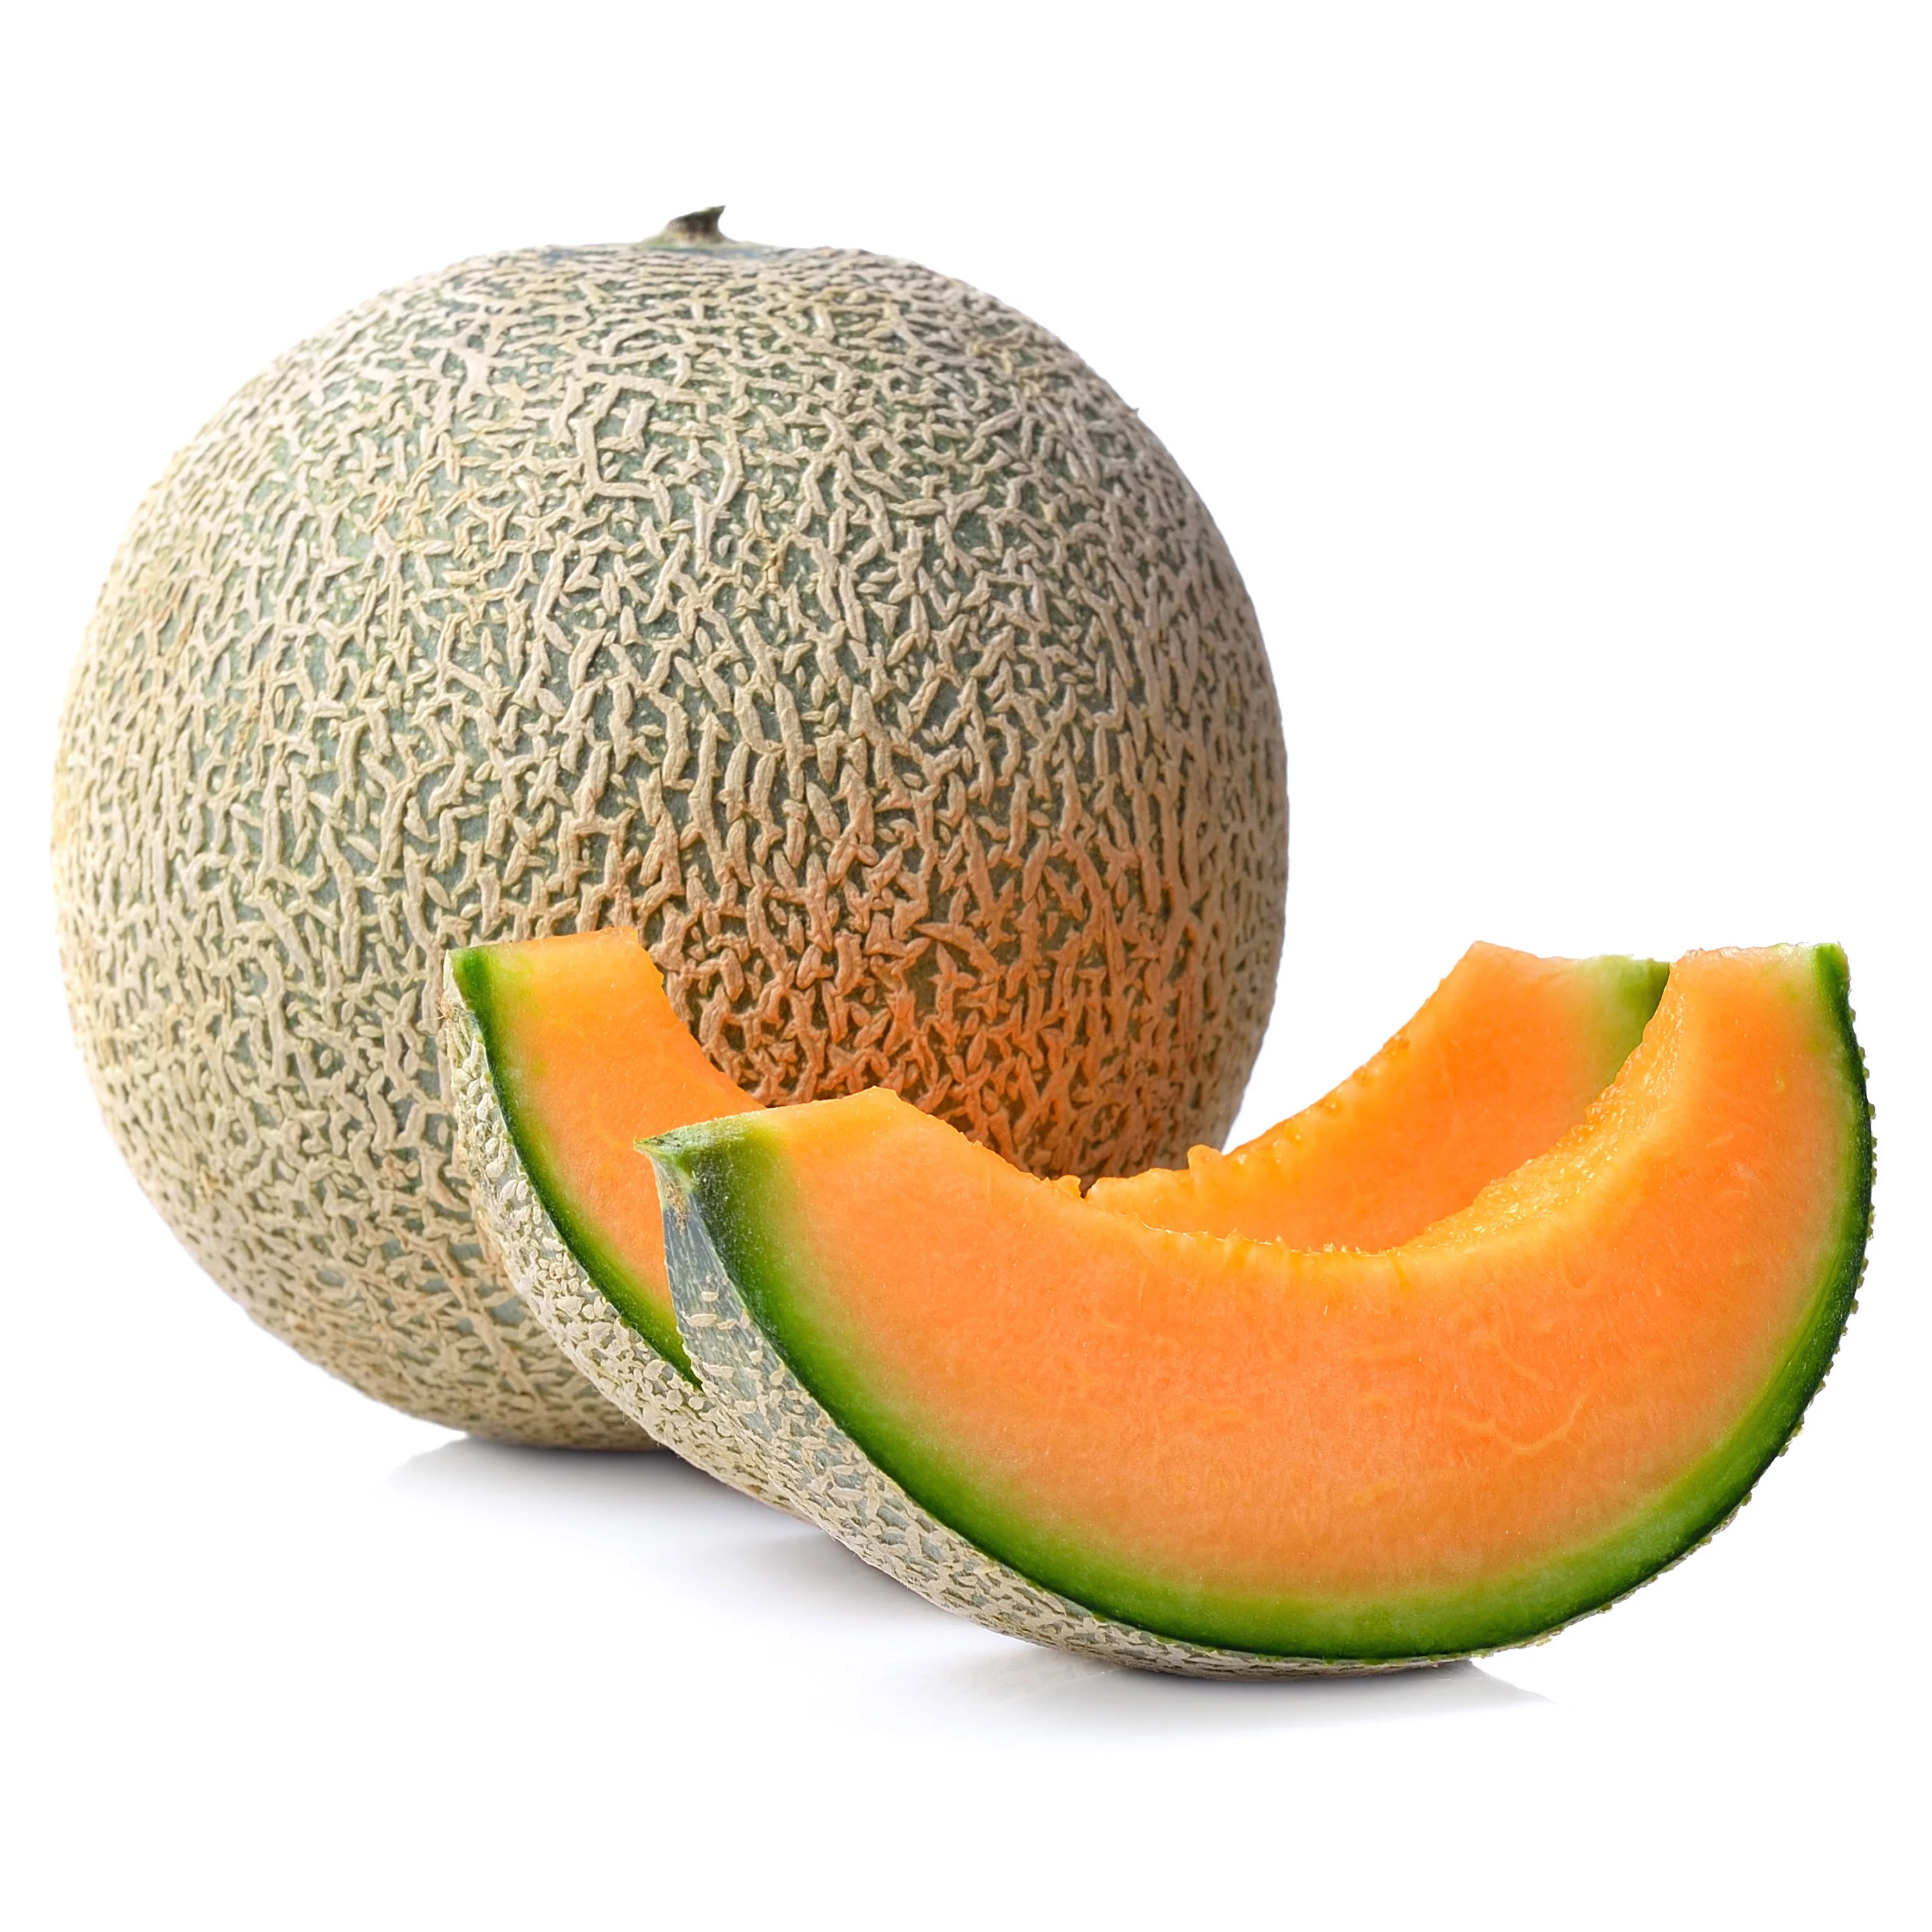 Cantaloupe image - Agro trade for import & export [Mahdy Fresh - since 2000]